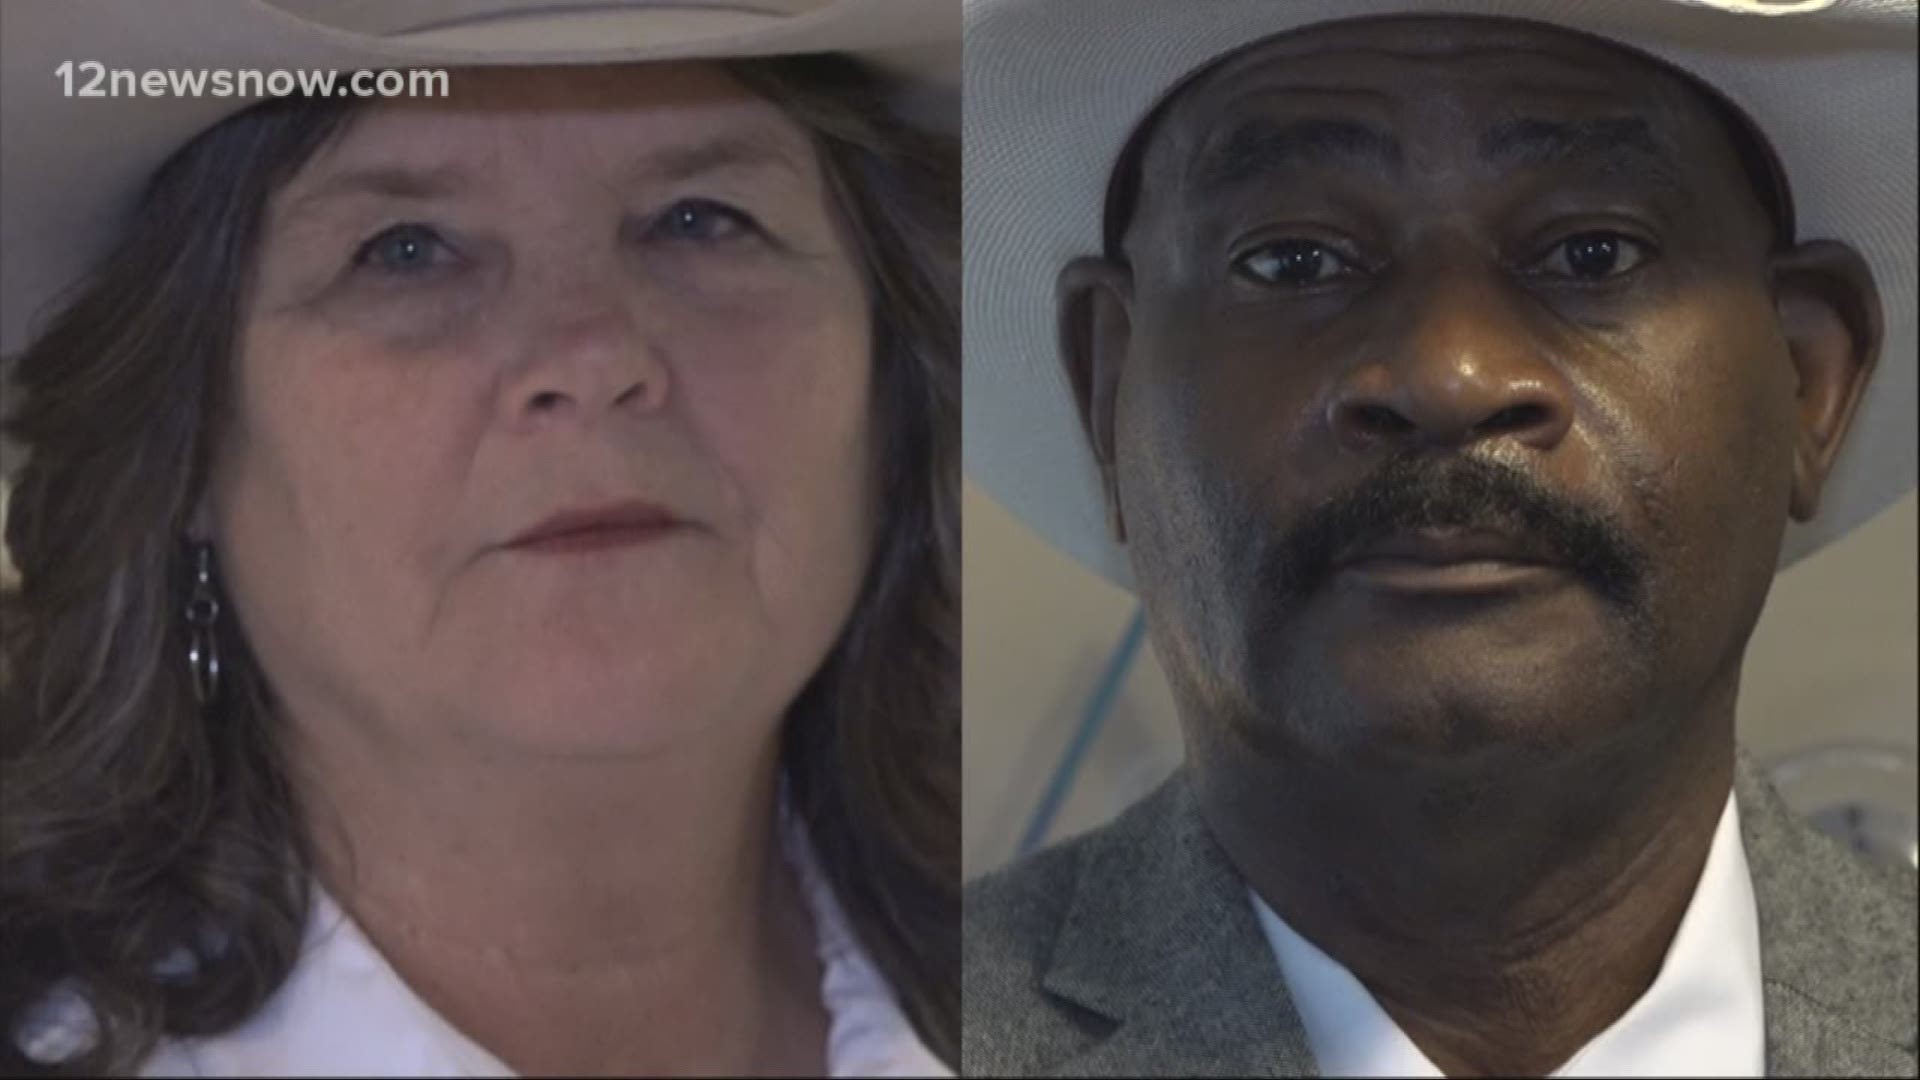 If elected, Cynthia Hall would became the first female sheriff of Newton County. Robert Burby can be the department's first African-American should he win.